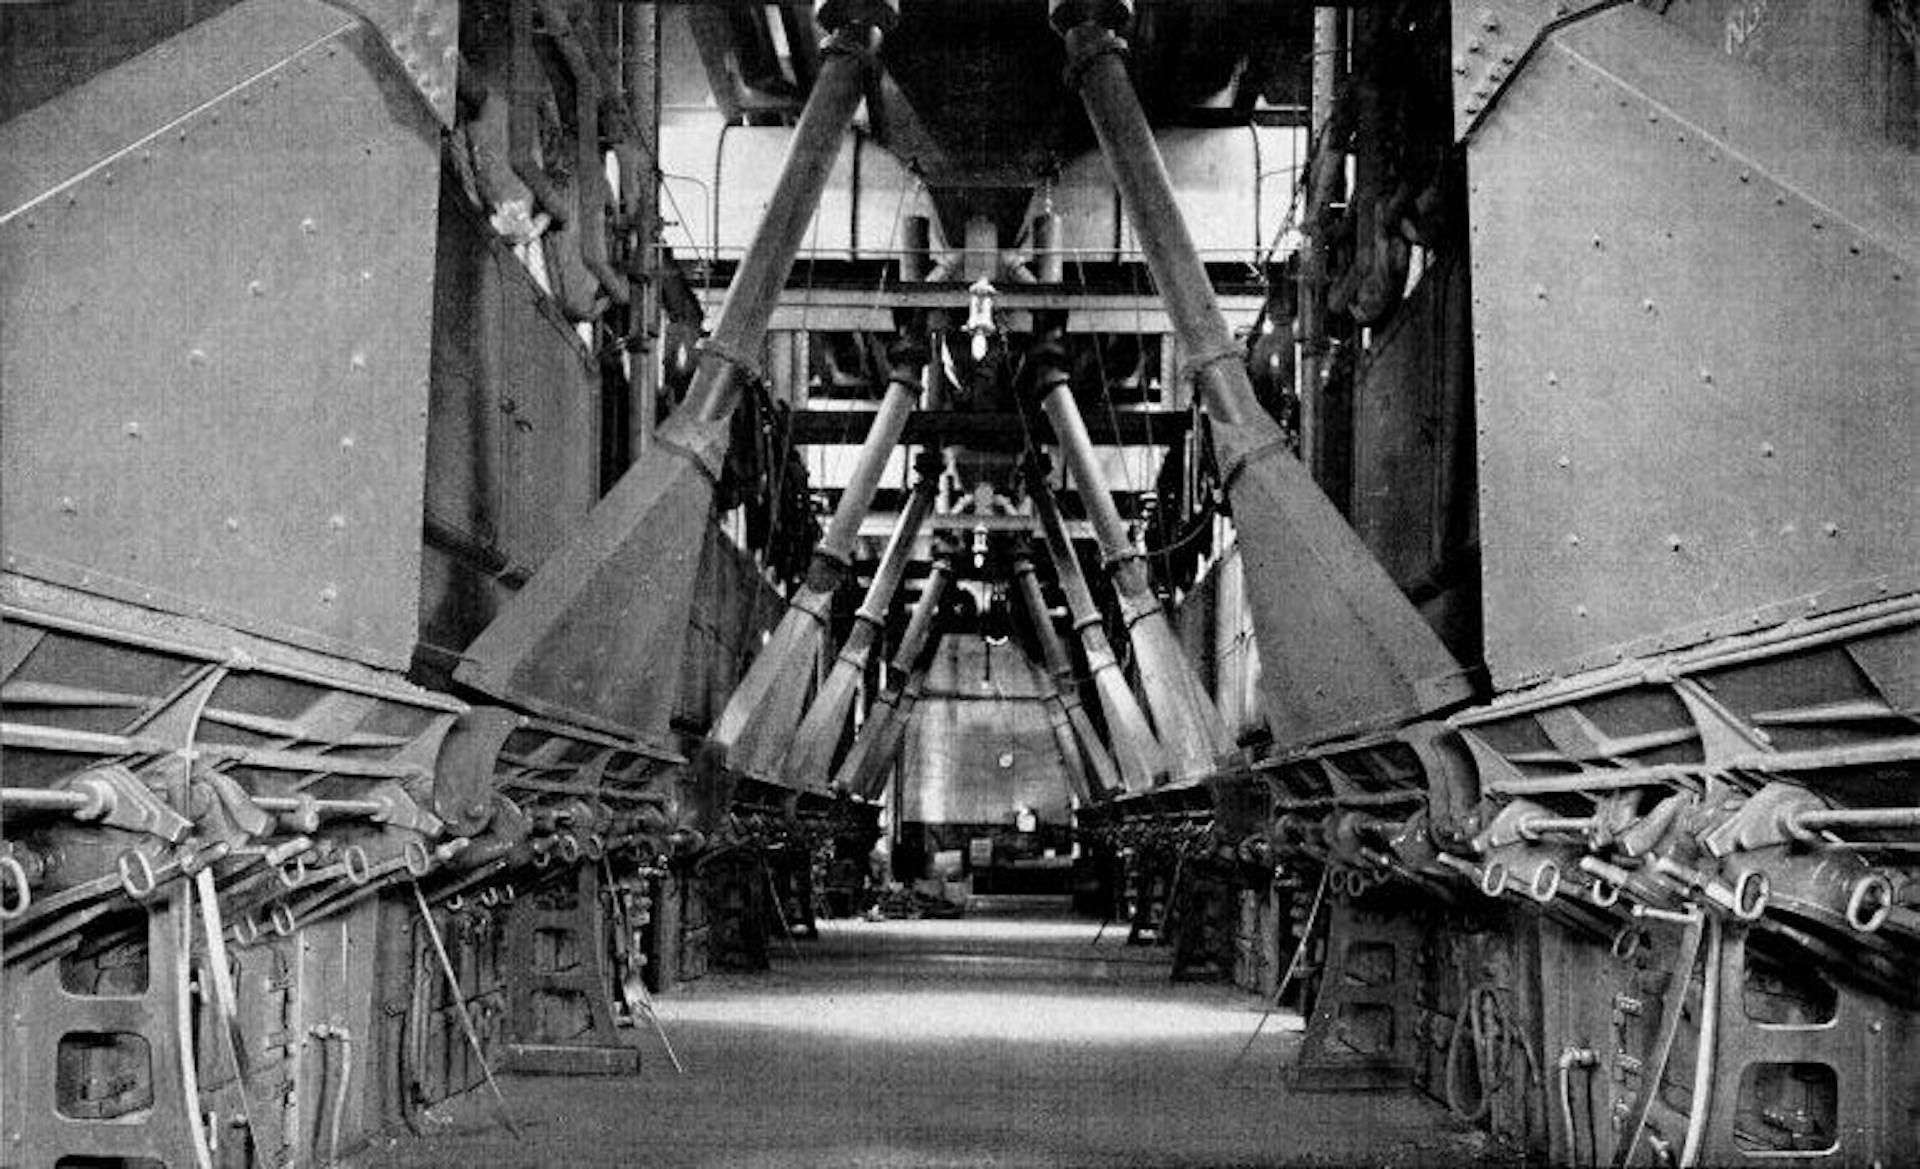 Portion of 12,080 Horse-power Installation of Babcock & Wilcox Boilers and Superheaters at the Potomac Electric Co., Washington, D. C.